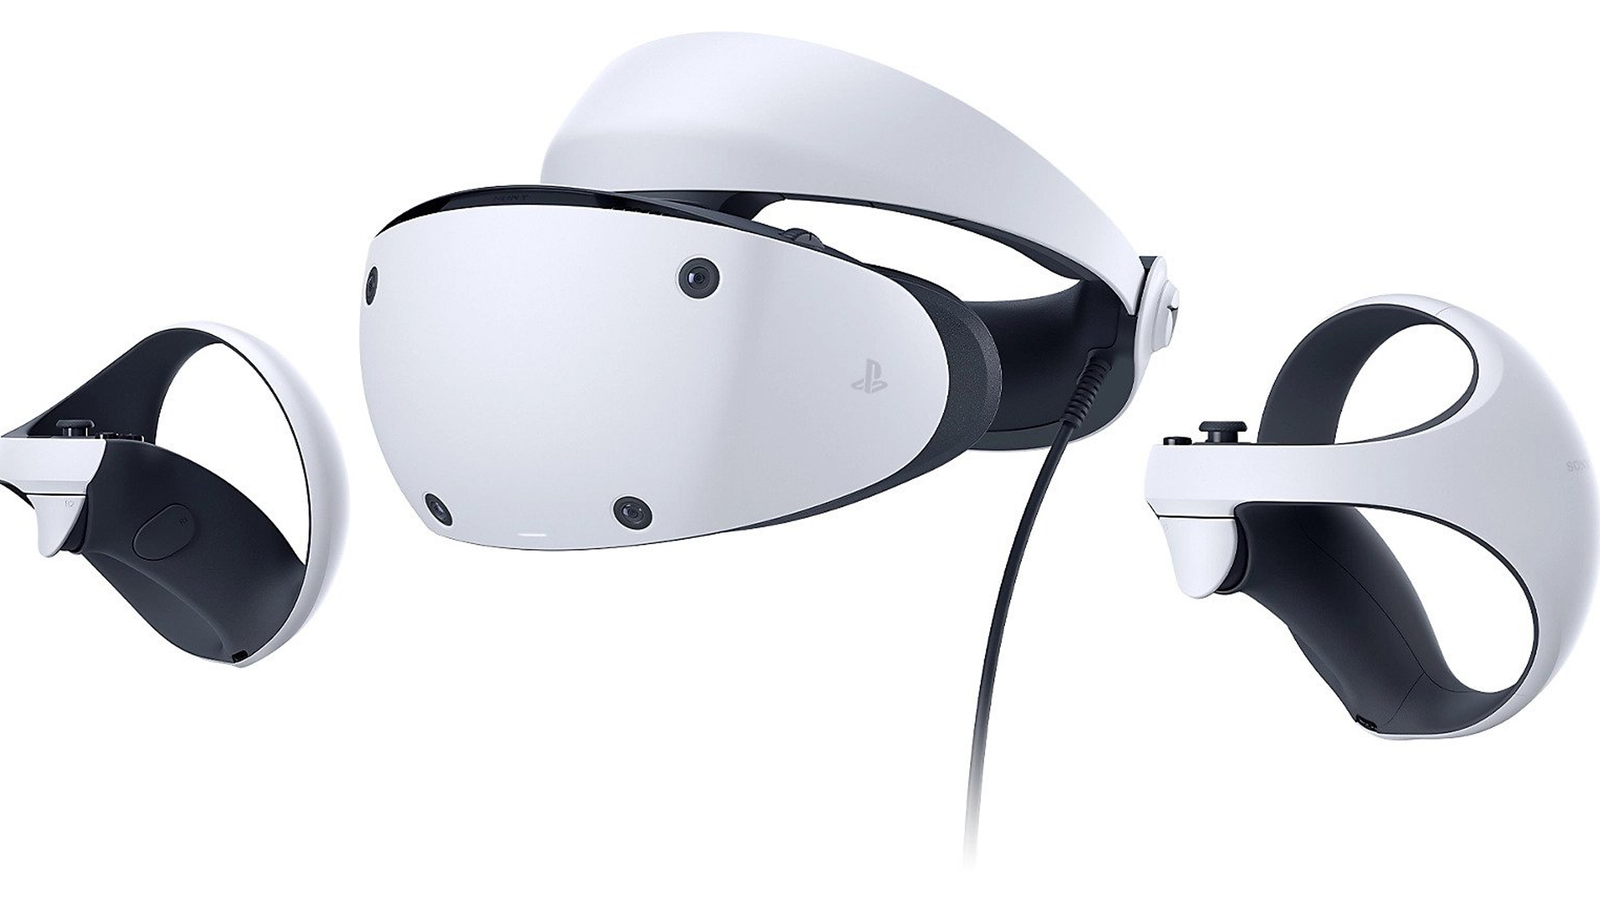 Sony claims its PS VR2 sales are actually surpassing those of the